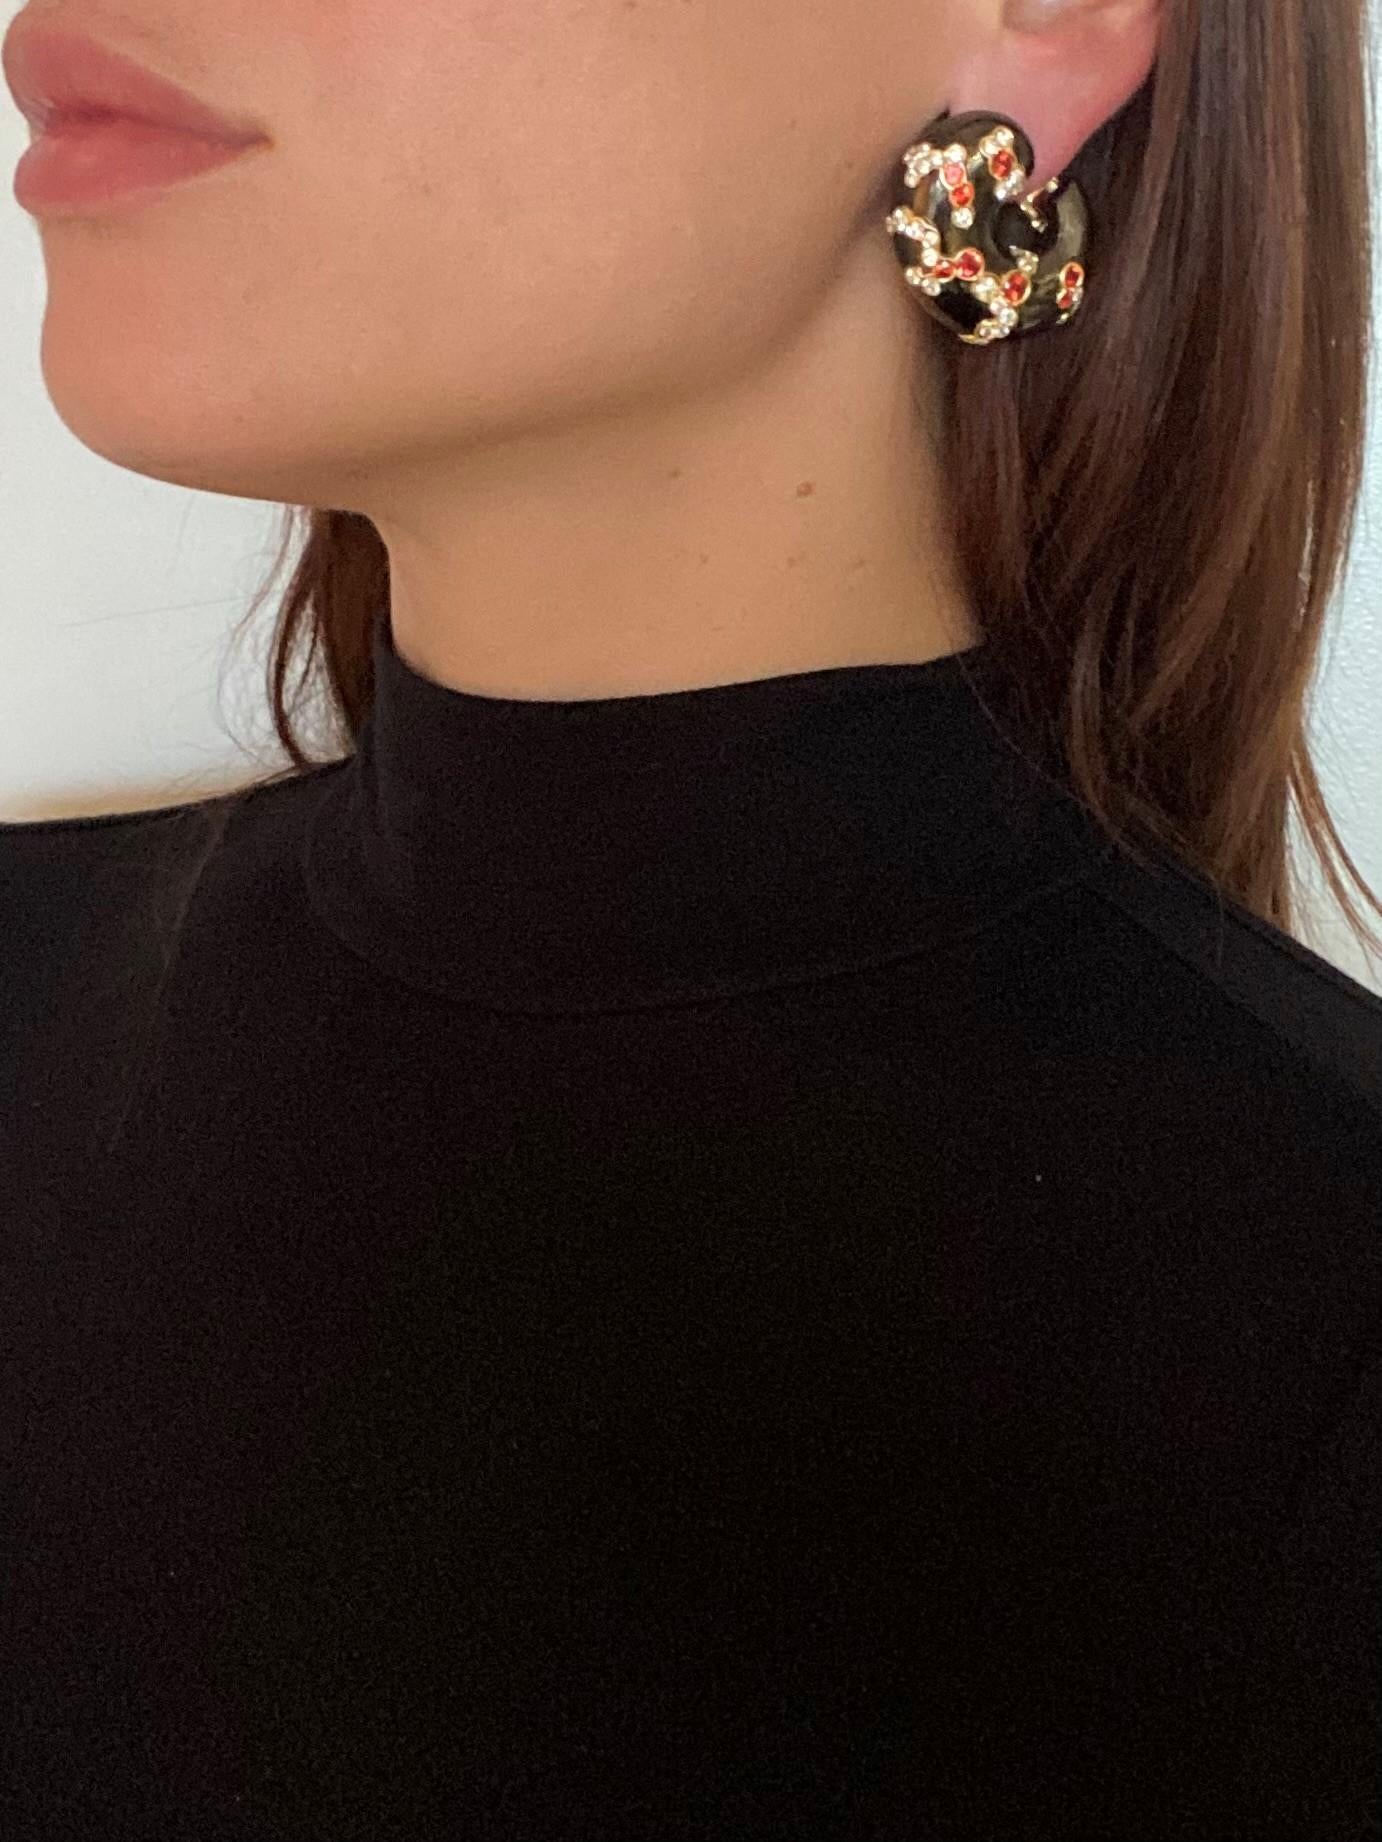 Swirled Yama hoops earrings designed by Marina B.

Exceptional pair, created in Milano Italy by the jewelry house of Marina Bvlgari, back in the 1987. These rare gem set clips earrings are part of the Yama collection produced in a limited edition of